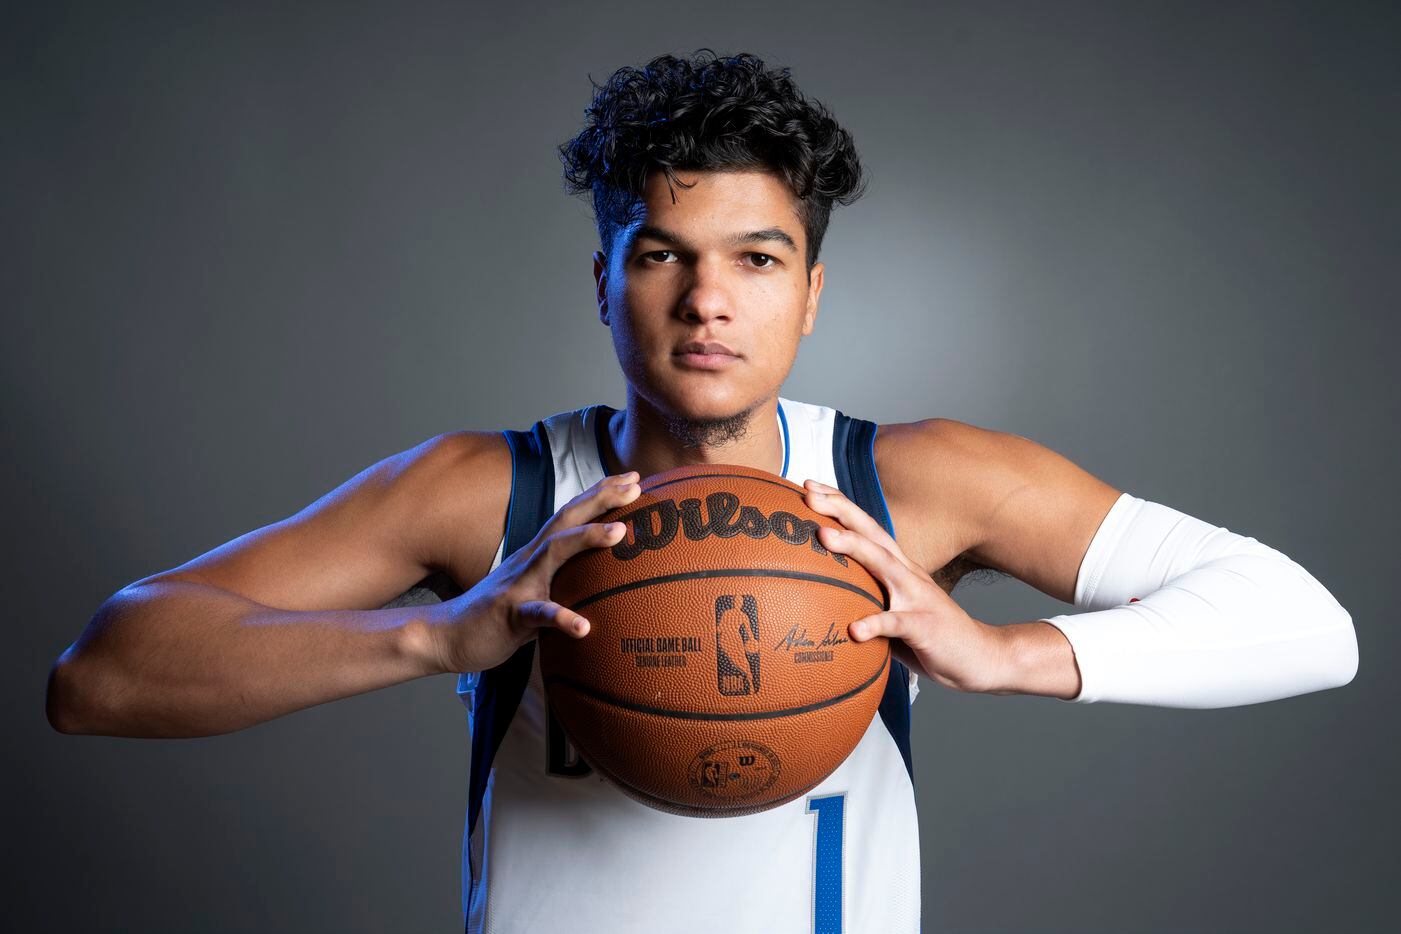 Dallas Mavericks guard Tyrell Terry (1) poses for a portrait during the Dallas Mavericks media day, Monday, September 27, 2021 at American Airlines Center in Dallas. (Jeffrey McWhorter/Special Contributor)